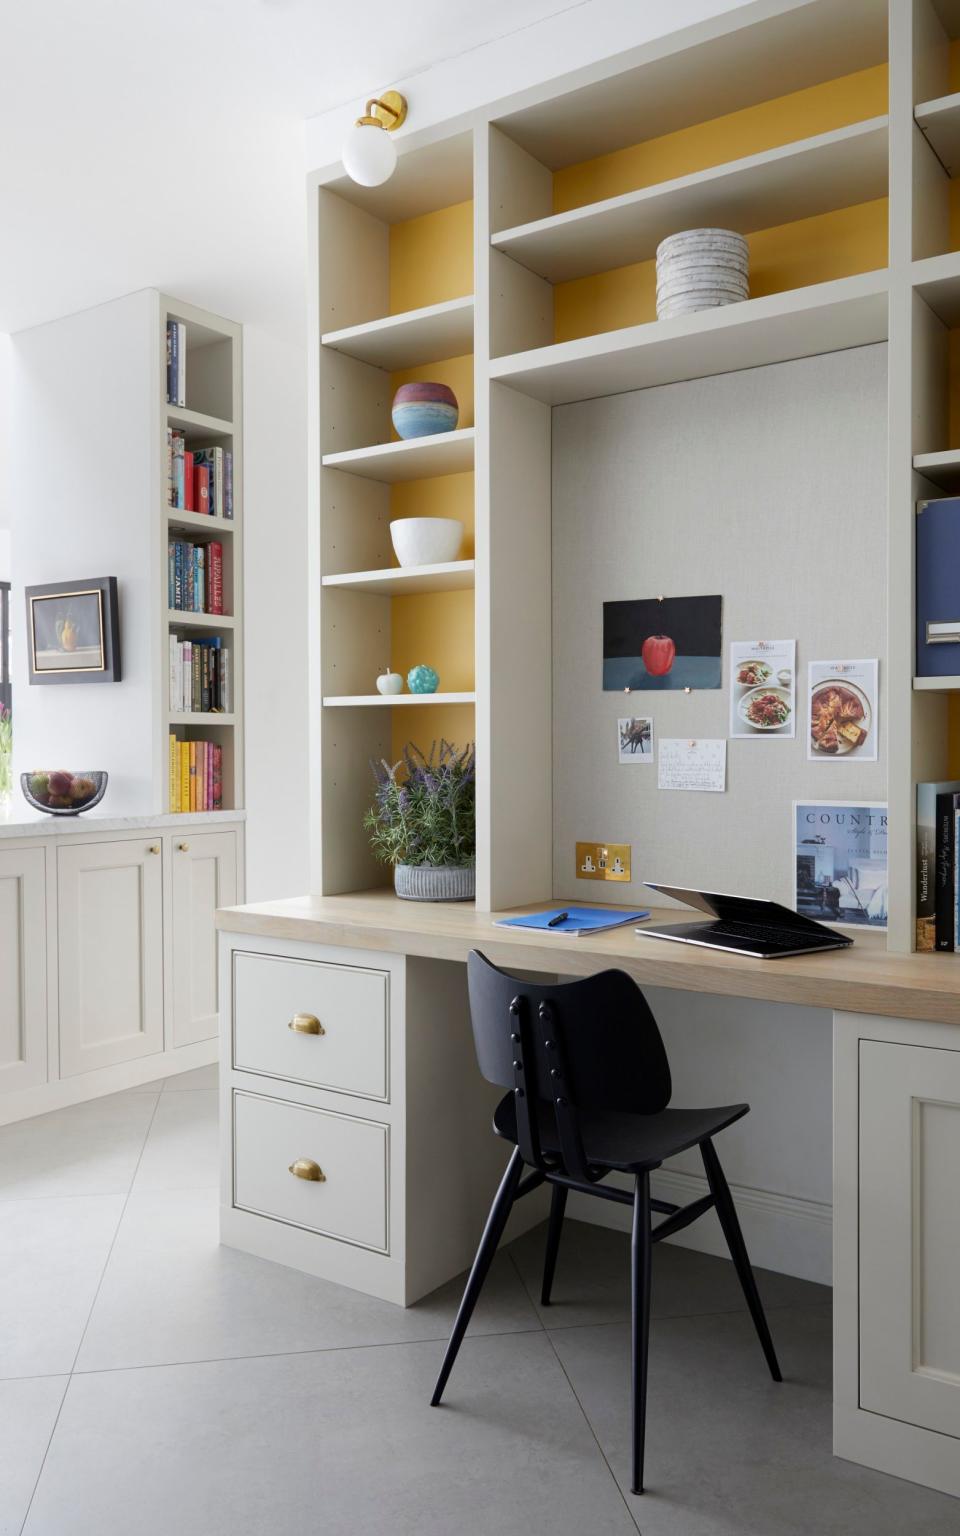 Naomi Astley Clarke made use of this small space by creating a study spot